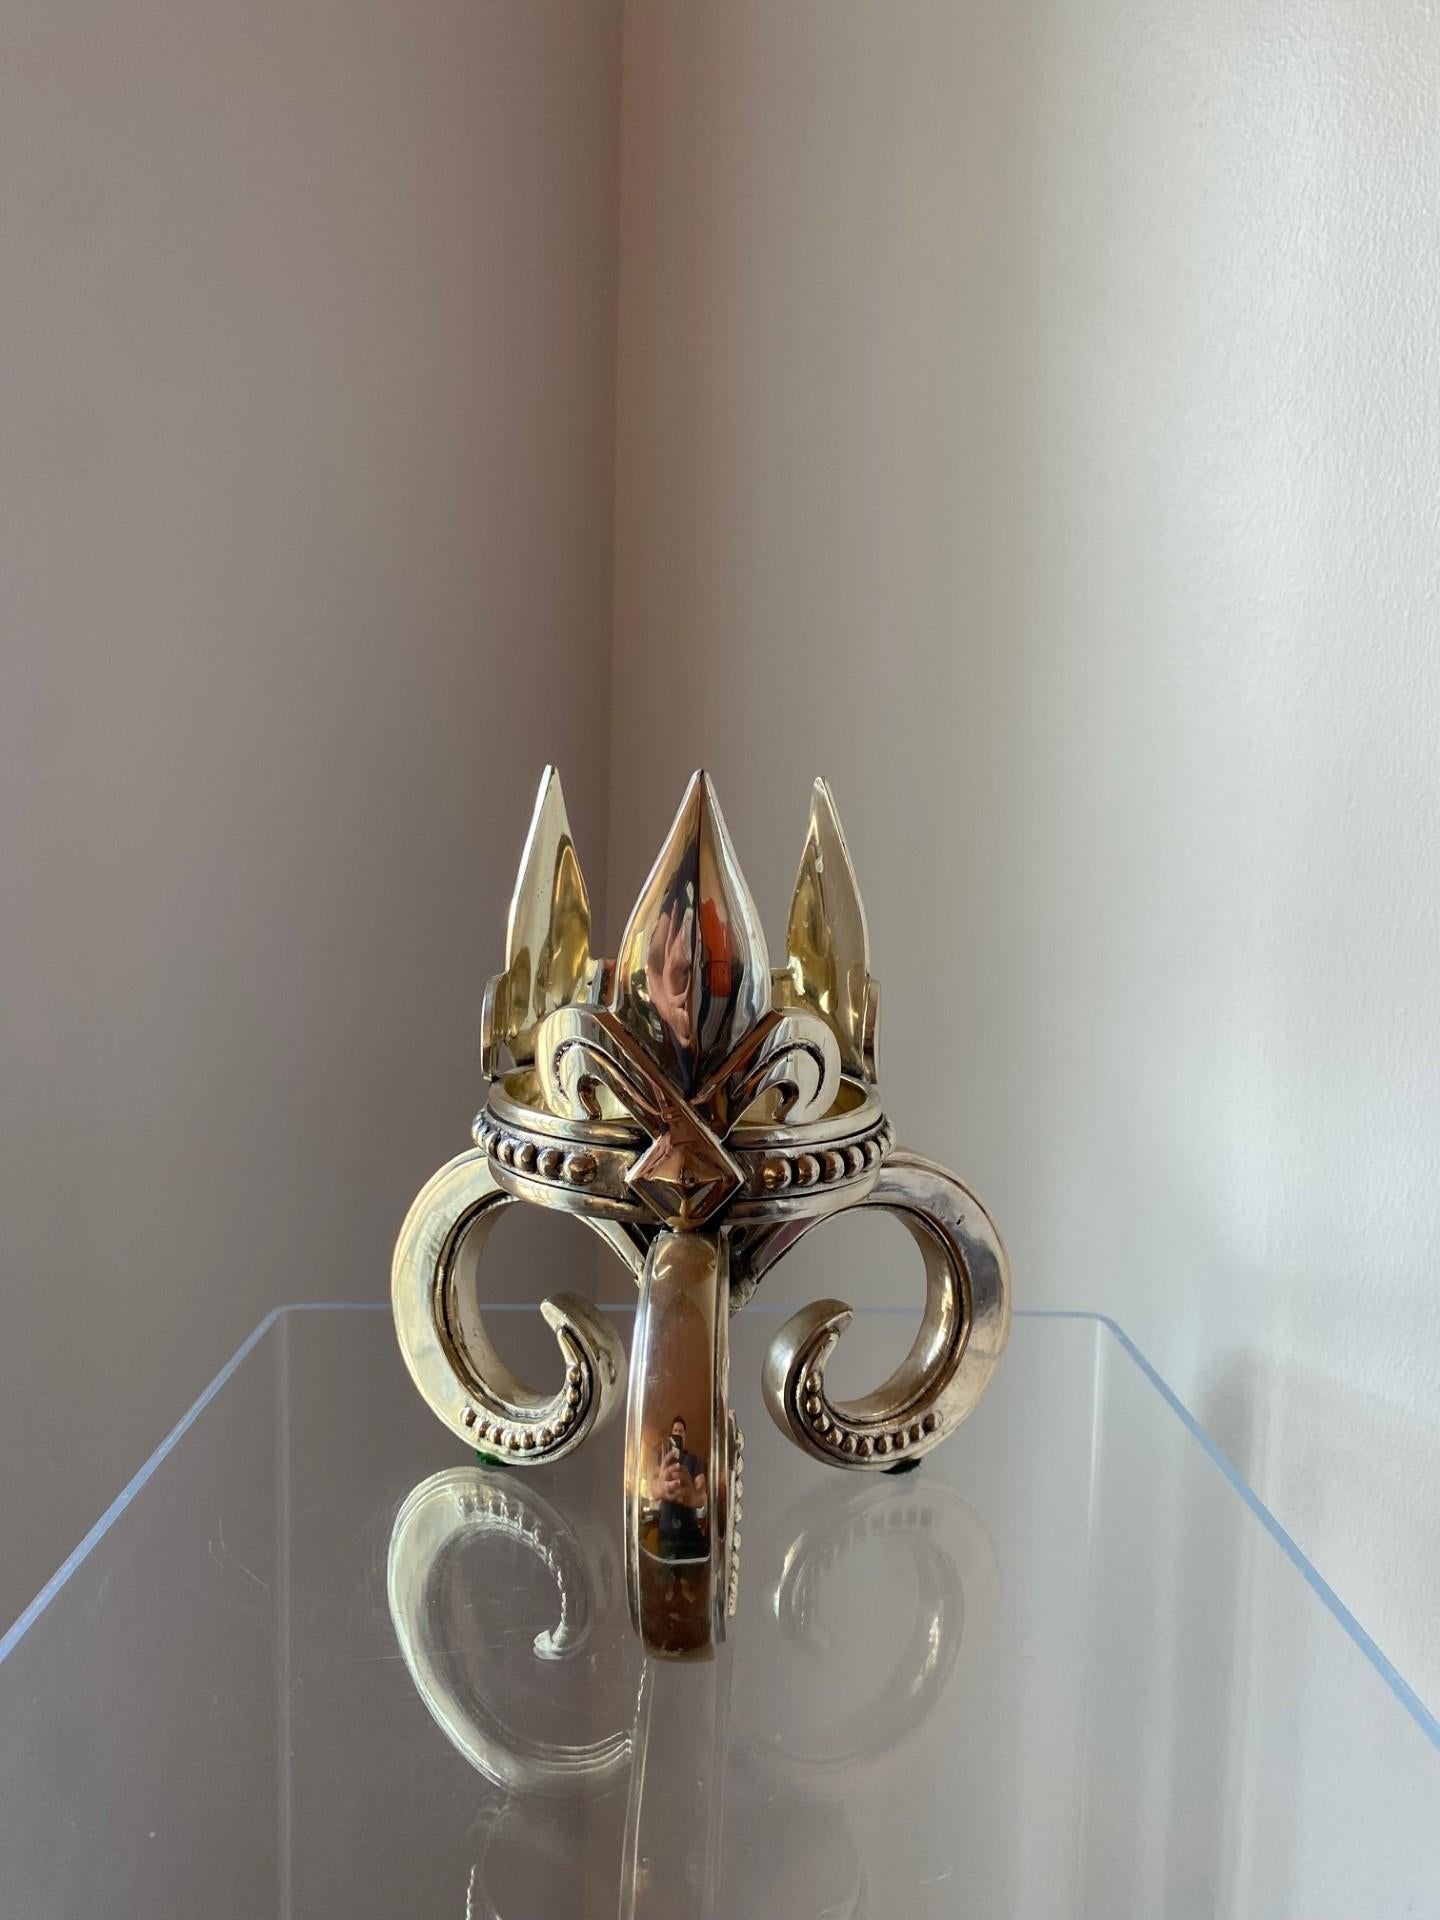 Beautiful vintage bronze candle holder.  This substantial piece has a trio fleur de lis design that surrounds the candle holding base.  The base is elevated with 3 curvaceous legs that add beauty and elevate the piece to sculptural levels.  Unique